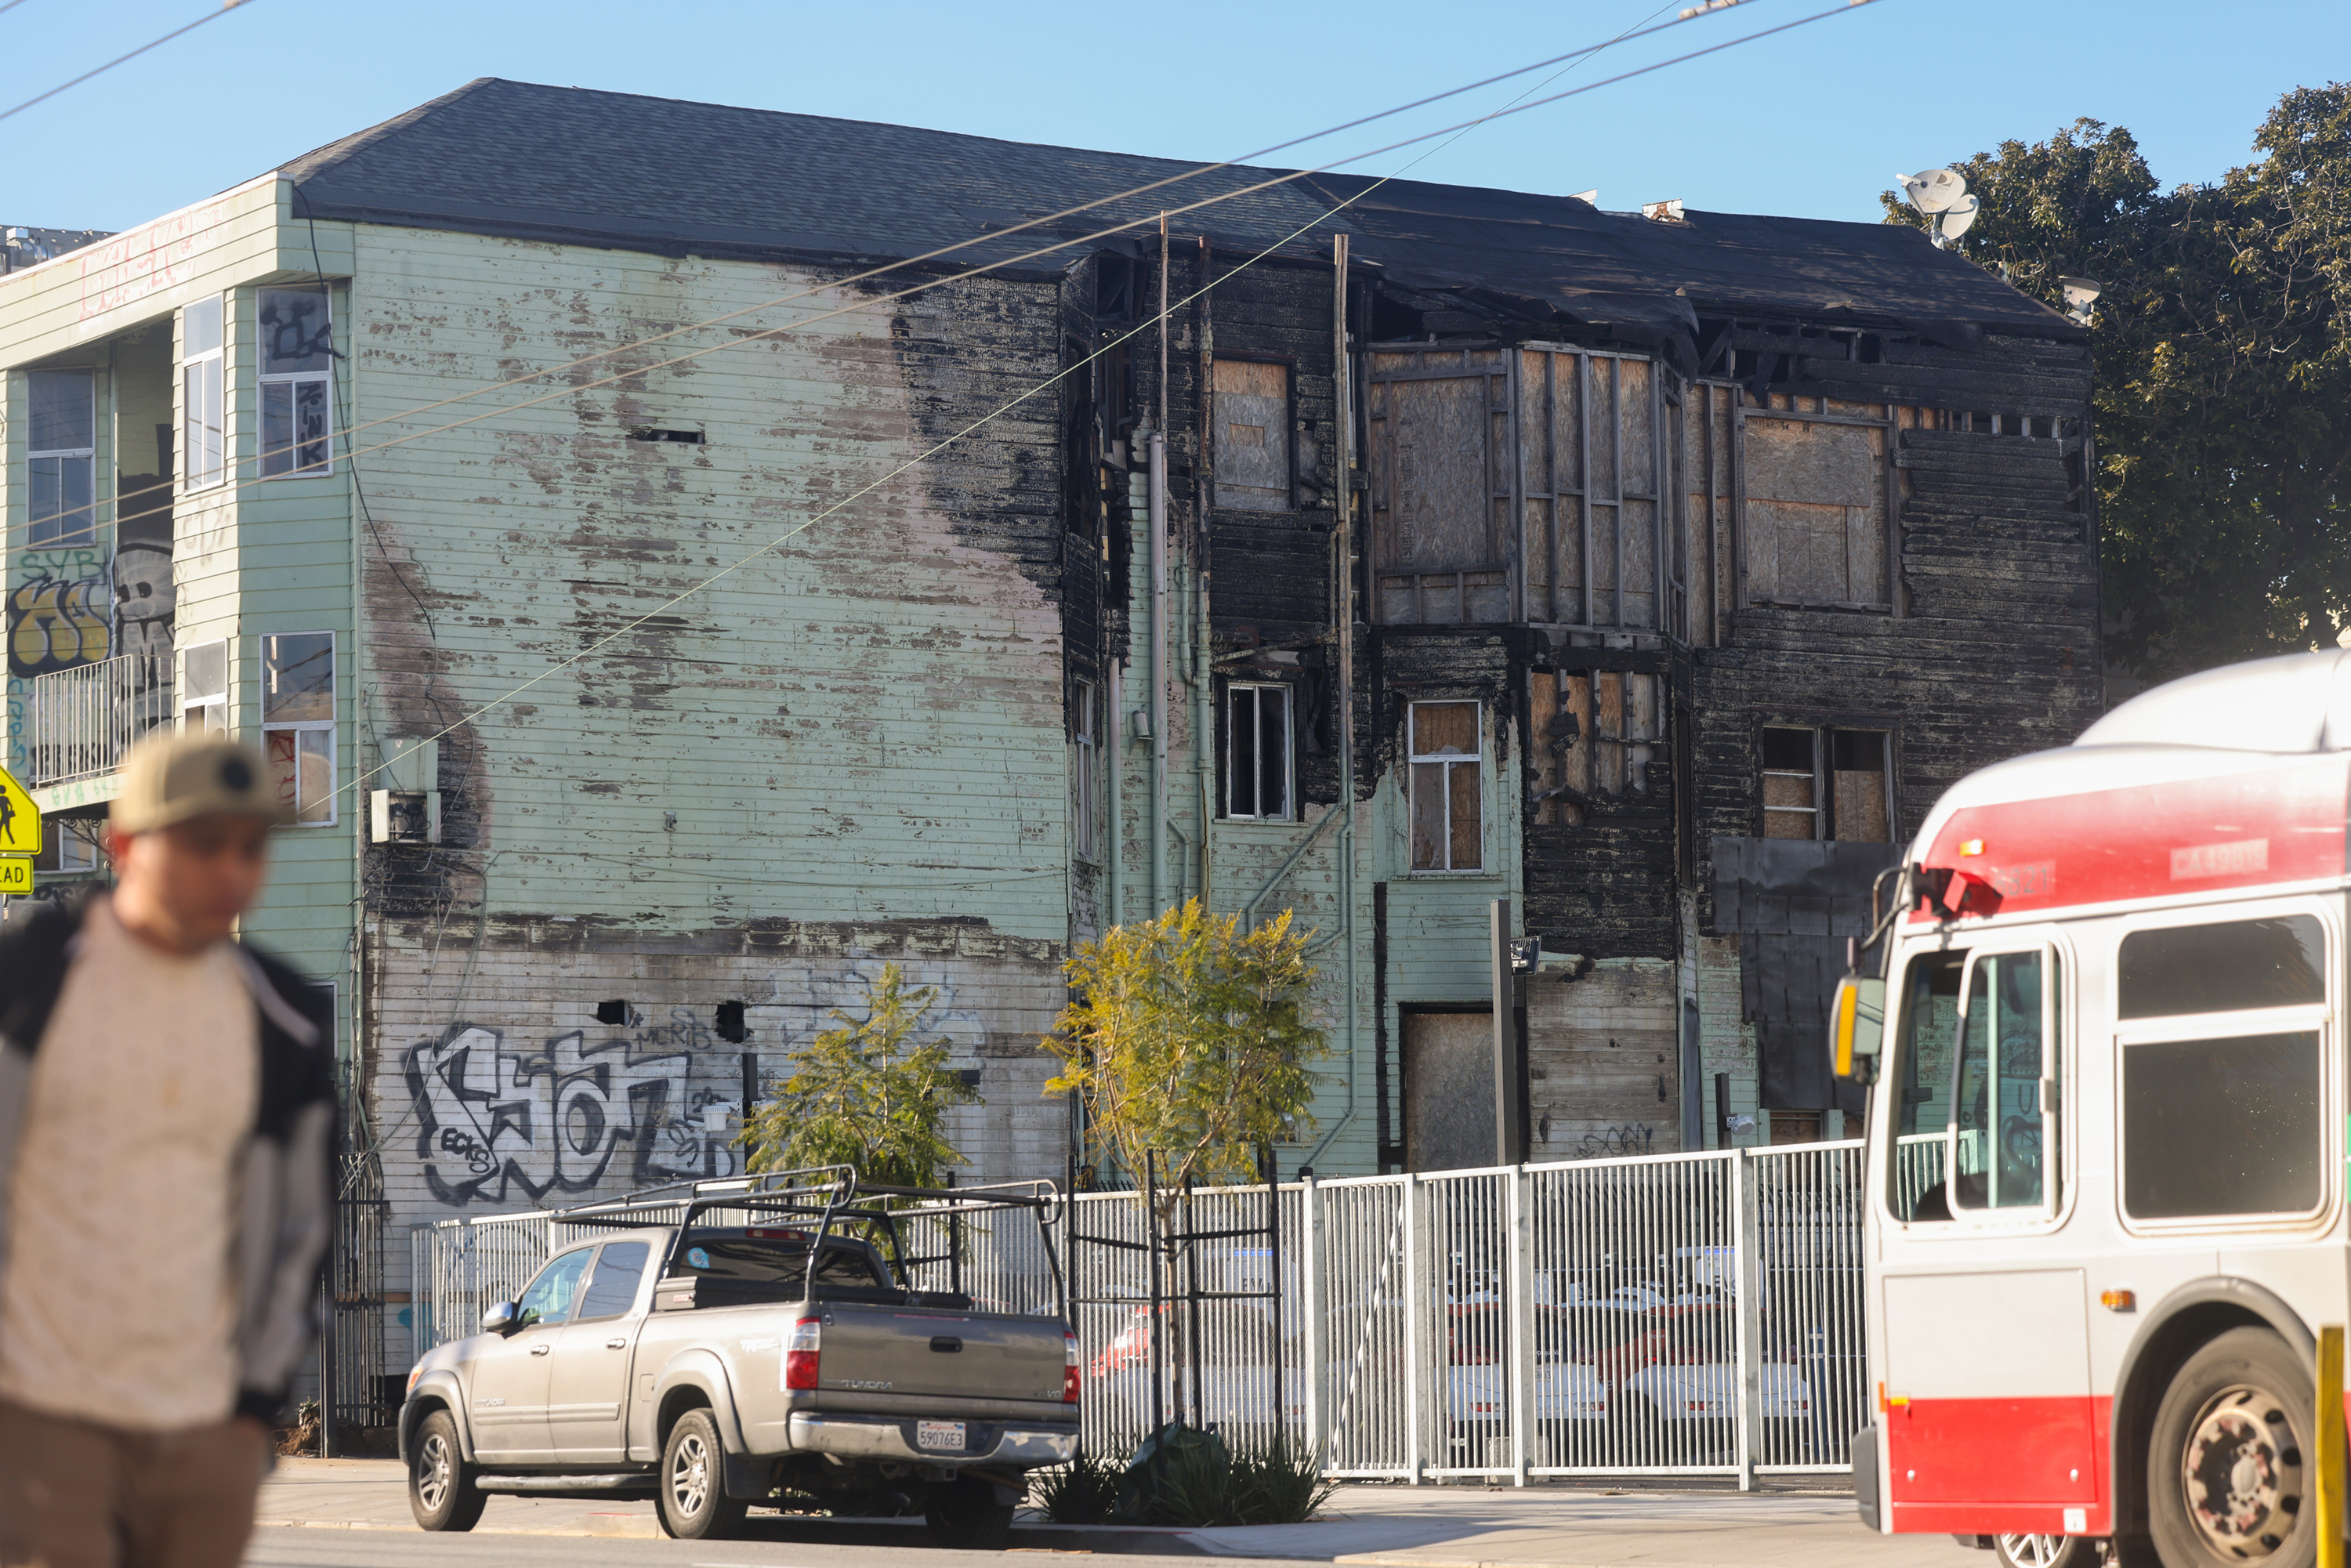 A dilapidated two-story building with charred walls, graffiti, and a fence in an urban setting, with a blurred pedestrian and bus in the foreground.